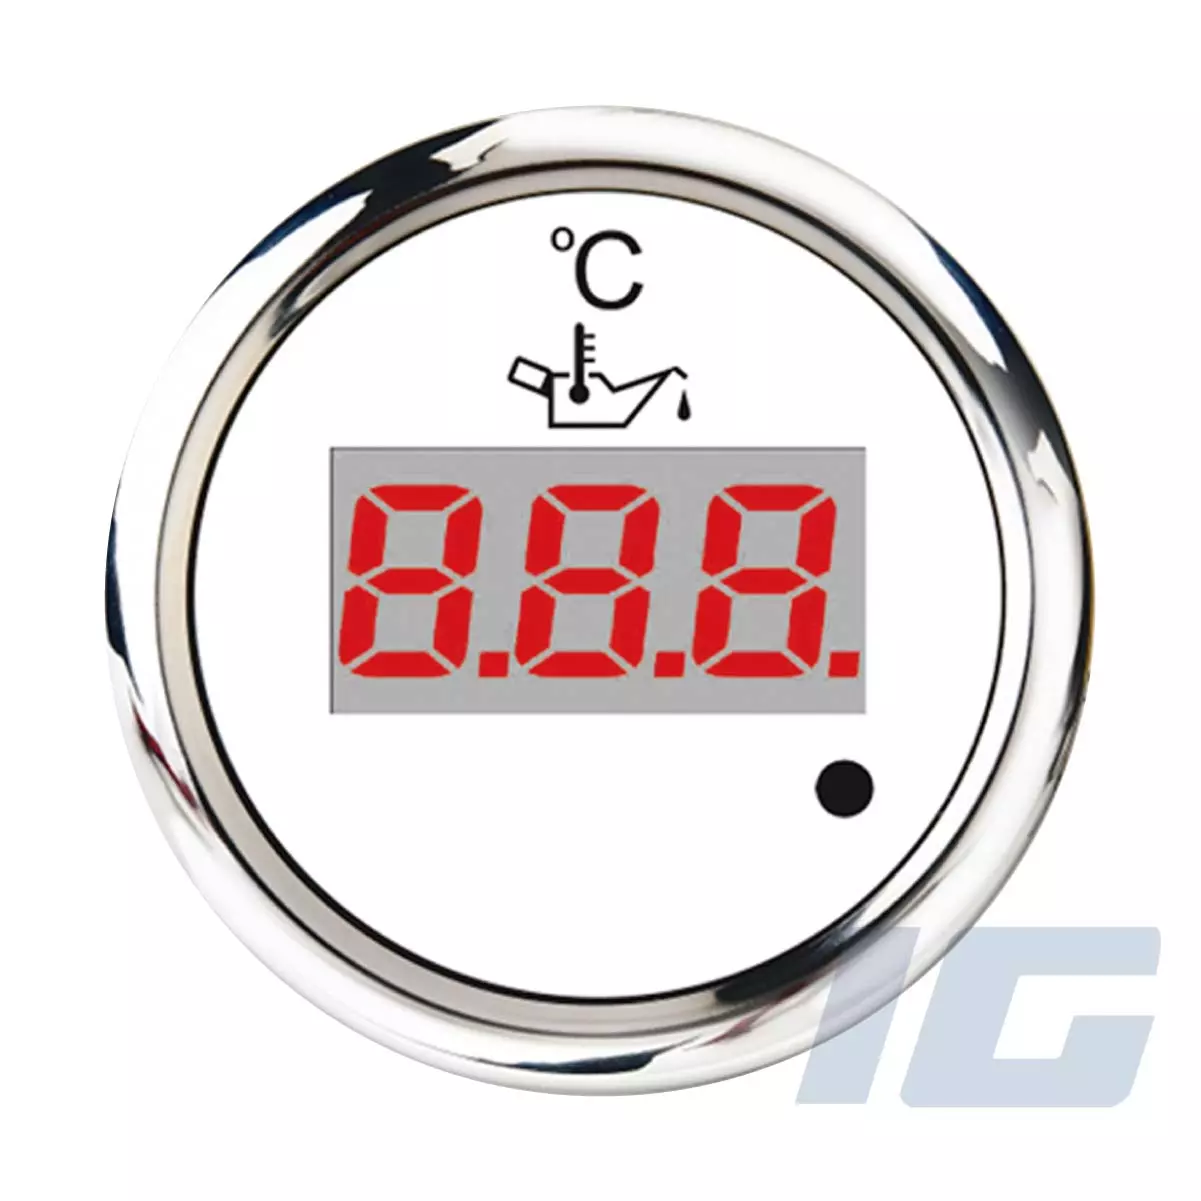 igauge, W Pro, Series, 52mm, White Face, Aftermarket, Marine, Gauge, Boat, Outboard, Oil Temperature